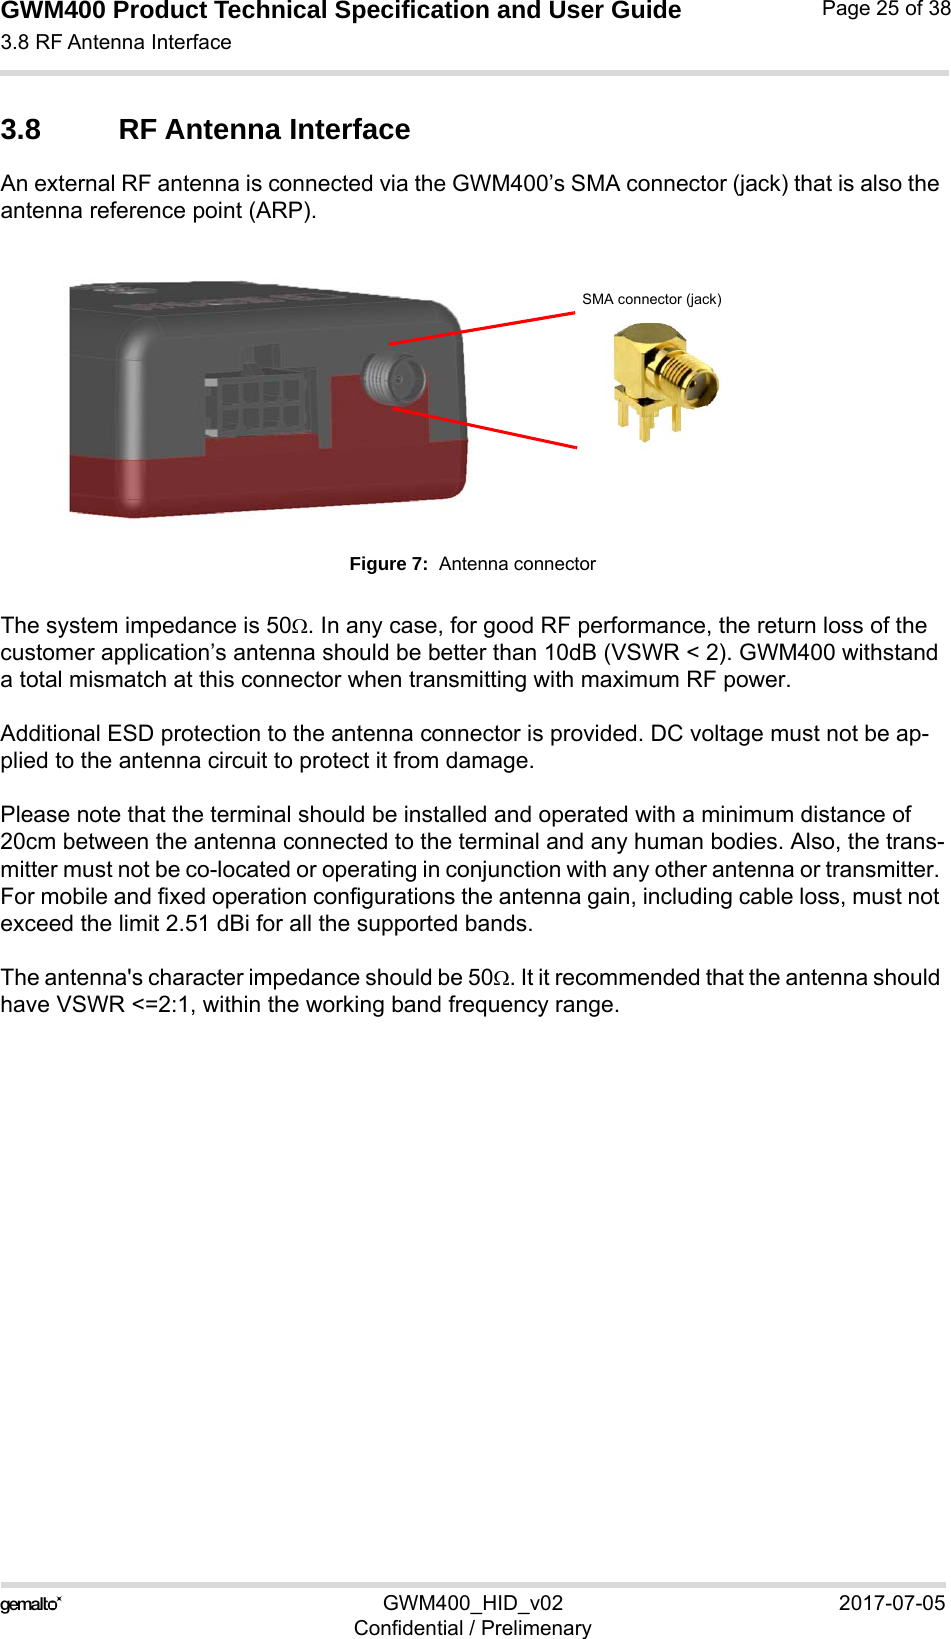 GWM400 Product Technical Specification and User Guide3.8 RF Antenna Interface25GWM400_HID_v02 2017-07-05Confidential / PrelimenaryPage 25 of 383.8 RF Antenna InterfaceAn external RF antenna is connected via the GWM400’s SMA connector (jack) that is also the antenna reference point (ARP).Figure 7:  Antenna connectorThe system impedance is 50. In any case, for good RF performance, the return loss of the customer application’s antenna should be better than 10dB (VSWR &lt; 2). GWM400 withstand a total mismatch at this connector when transmitting with maximum RF power.Additional ESD protection to the antenna connector is provided. DC voltage must not be ap-plied to the antenna circuit to protect it from damage.Please note that the terminal should be installed and operated with a minimum distance of 20cm between the antenna connected to the terminal and any human bodies. Also, the trans-mitter must not be co-located or operating in conjunction with any other antenna or transmitter. For mobile and fixed operation configurations the antenna gain, including cable loss, must not exceed the limit 2.51 dBi for all the supported bands.The antenna&apos;s character impedance should be 50. It it recommended that the antenna should have VSWR &lt;=2:1, within the working band frequency range. SMA connector (jack)